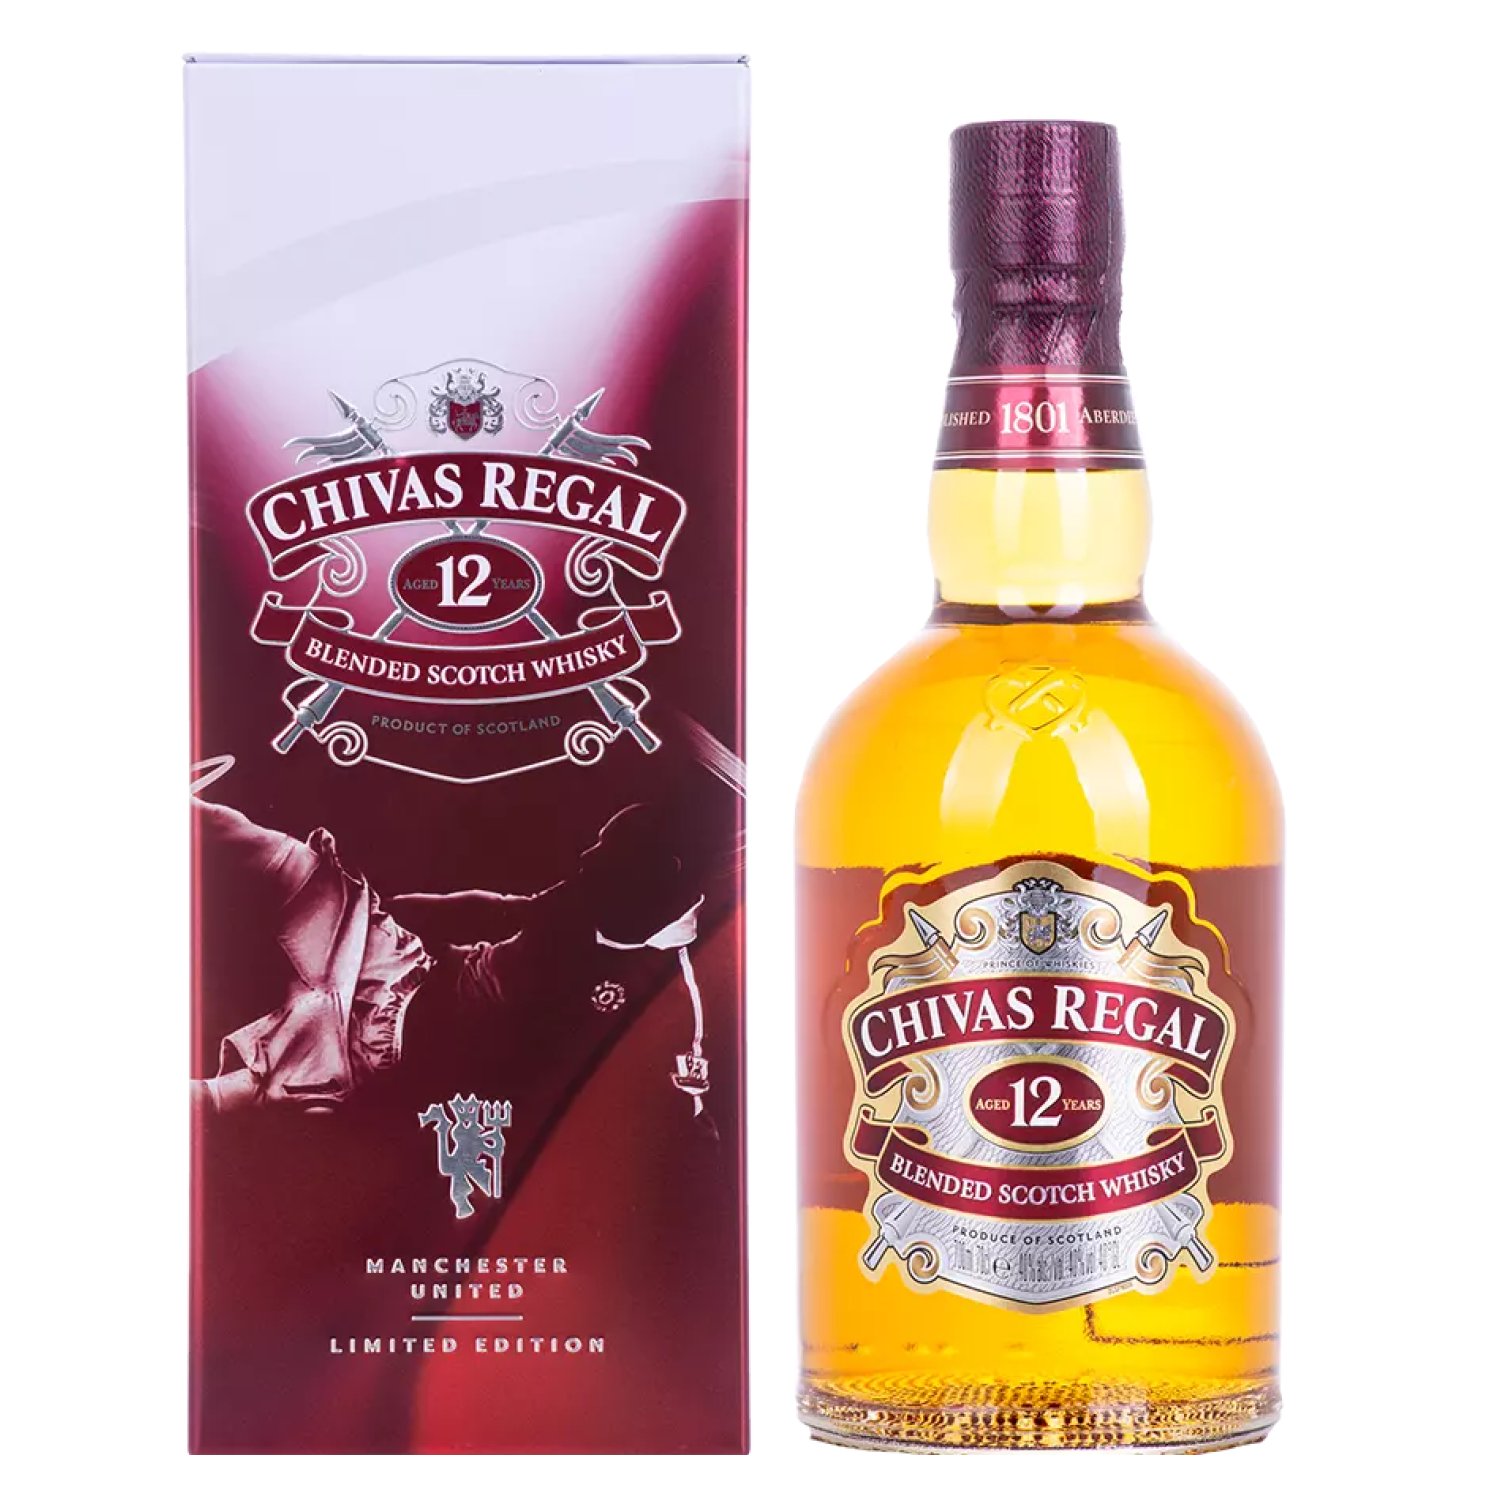 Chivas Regal 12 Years Old Blended Scotch Whisky Manchester United Limited Edition 40 Vol 0 7l In Tinbox